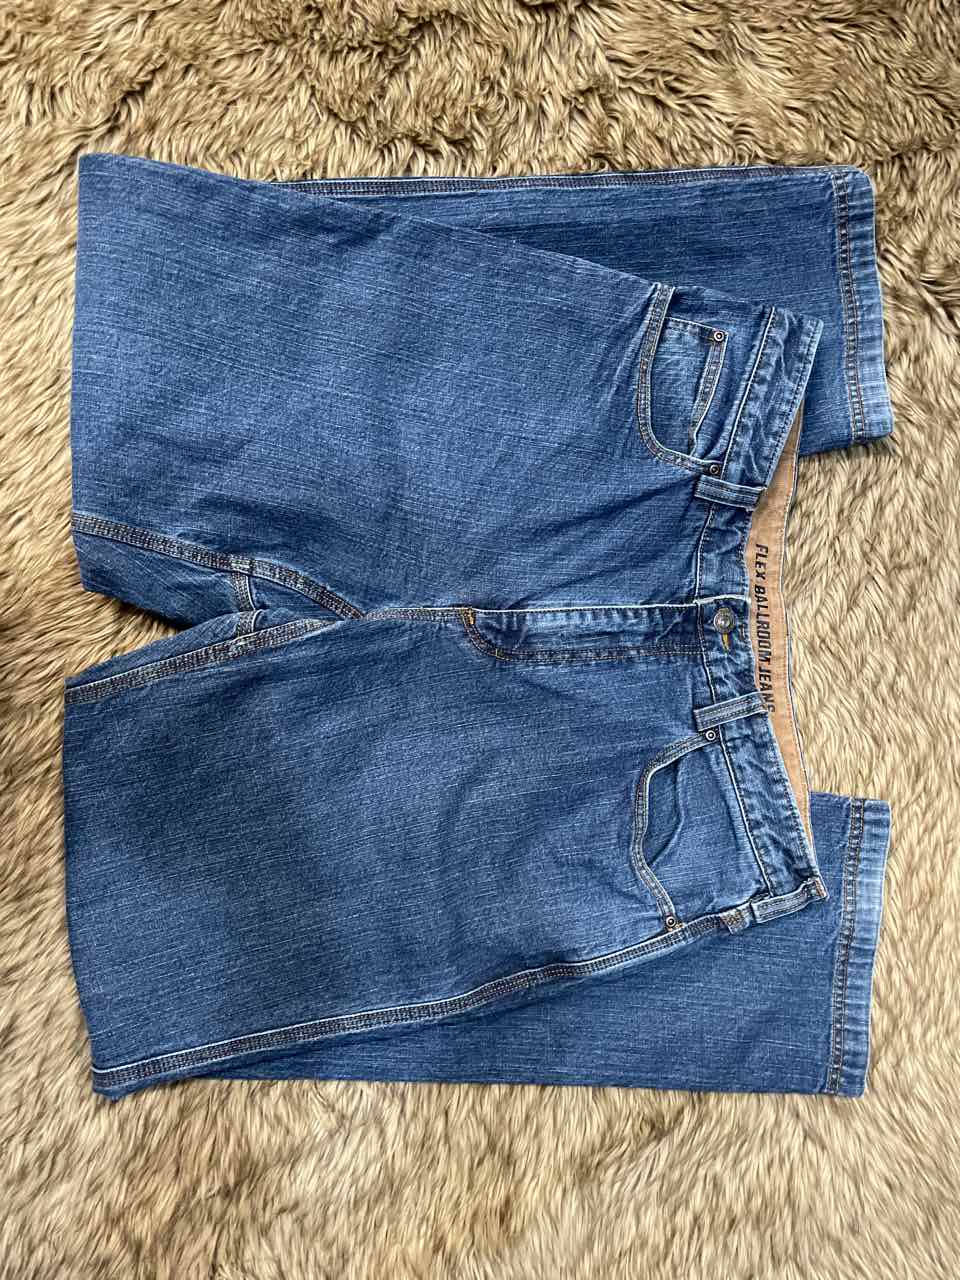 36/34 - Duluth Trading Co. Jeans